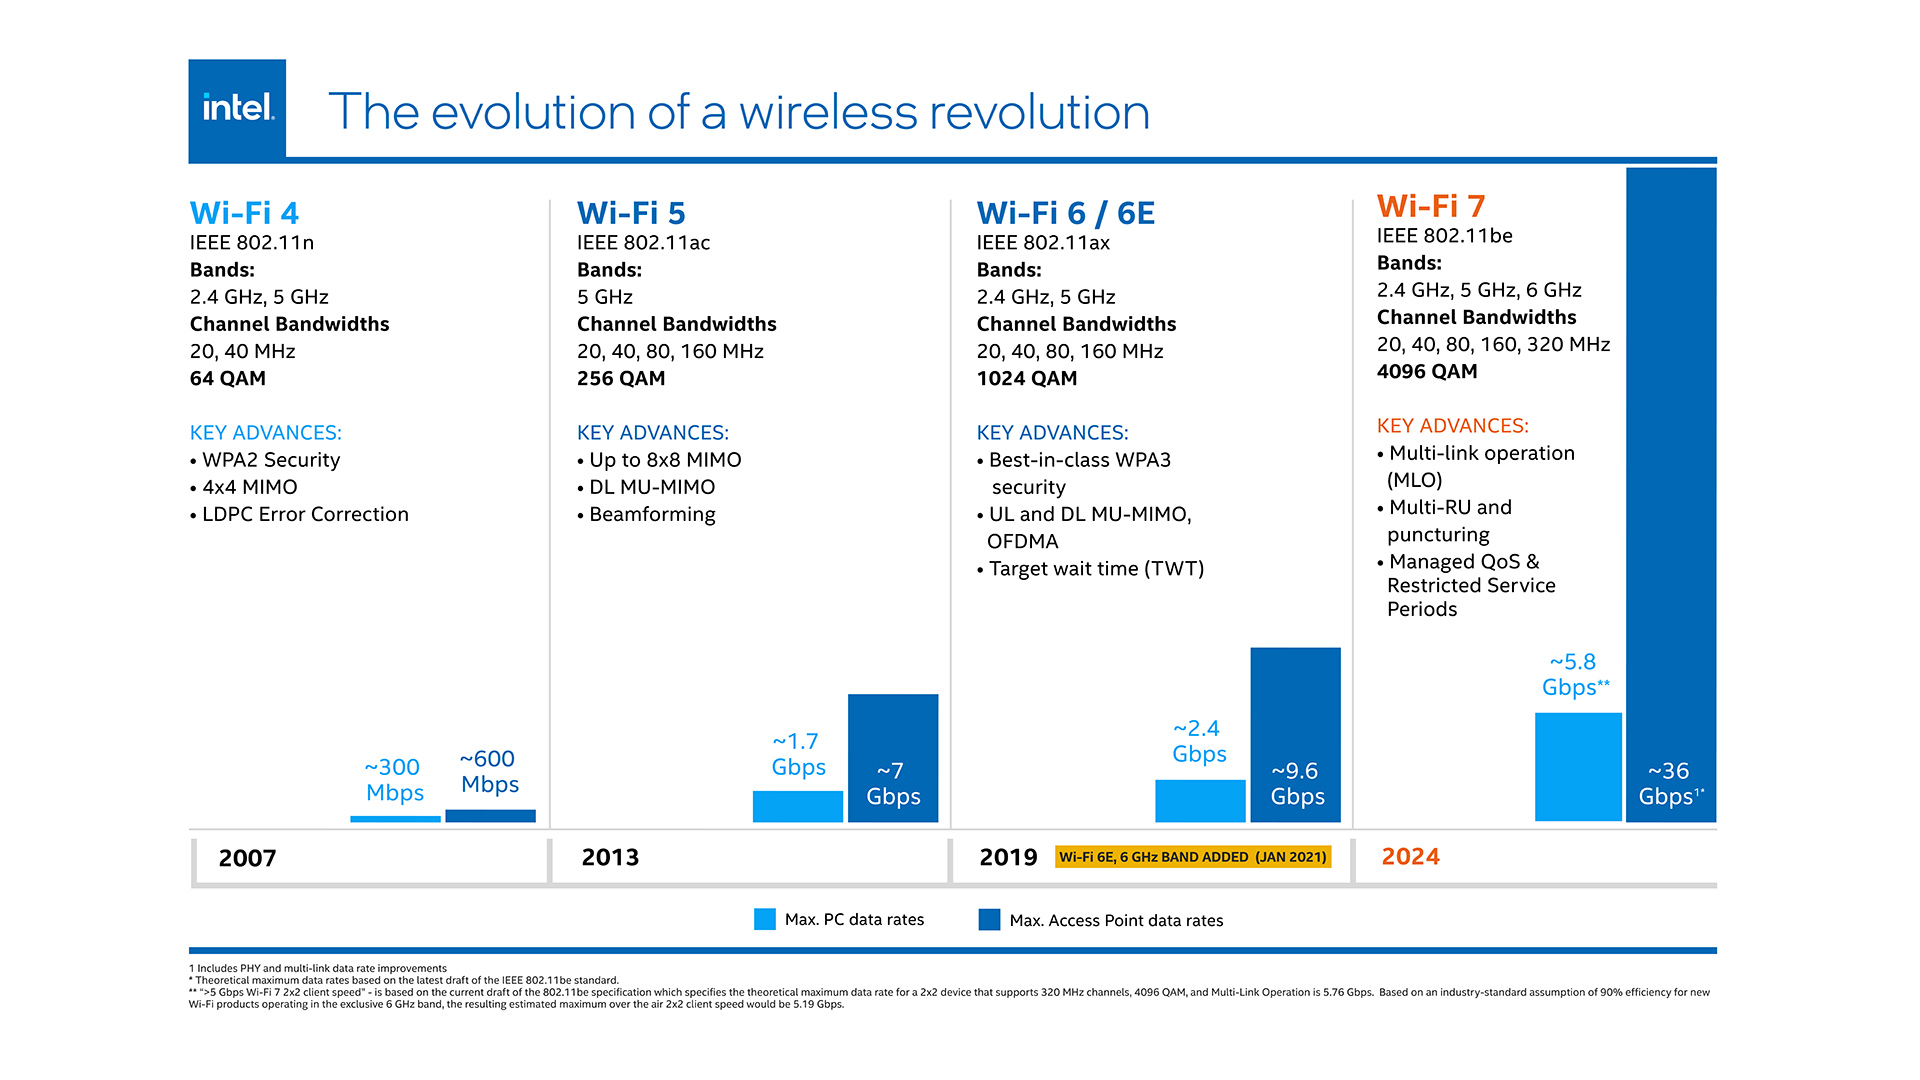 Intel's explainer for what Wi-Fi 7 means, compared to prior generations.